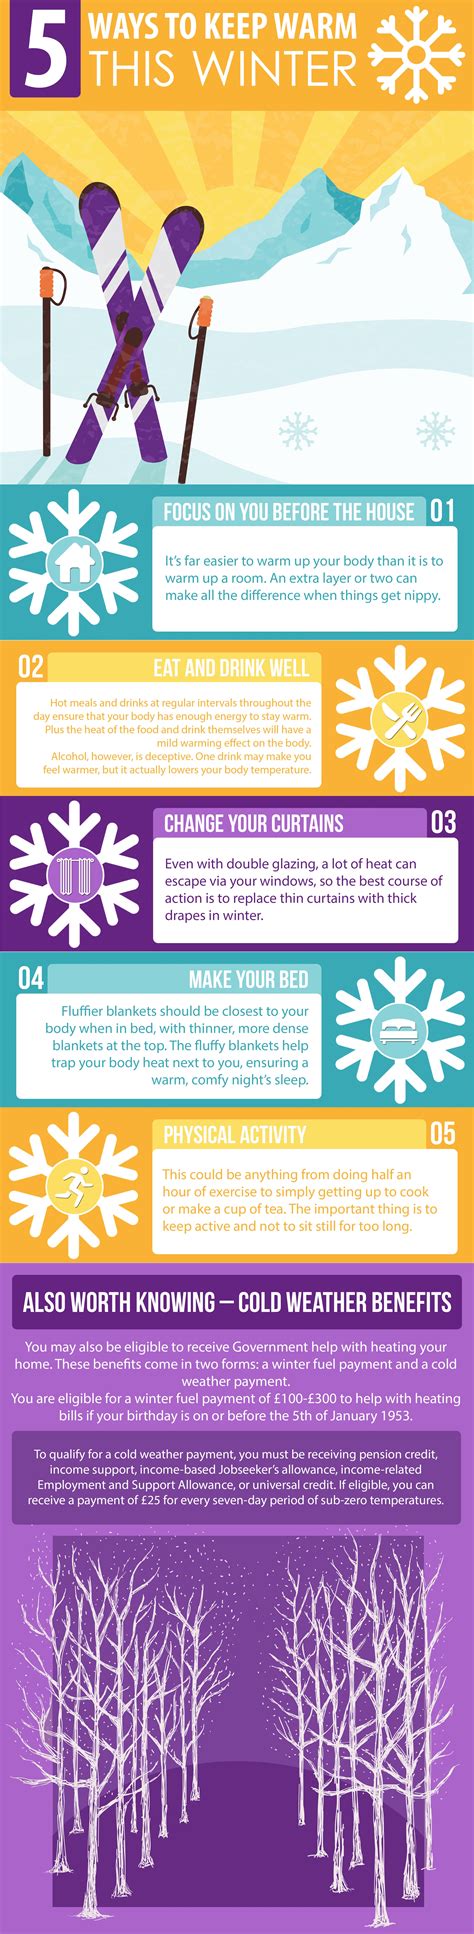 Keeping Warm This Winter Infographic Carelink24